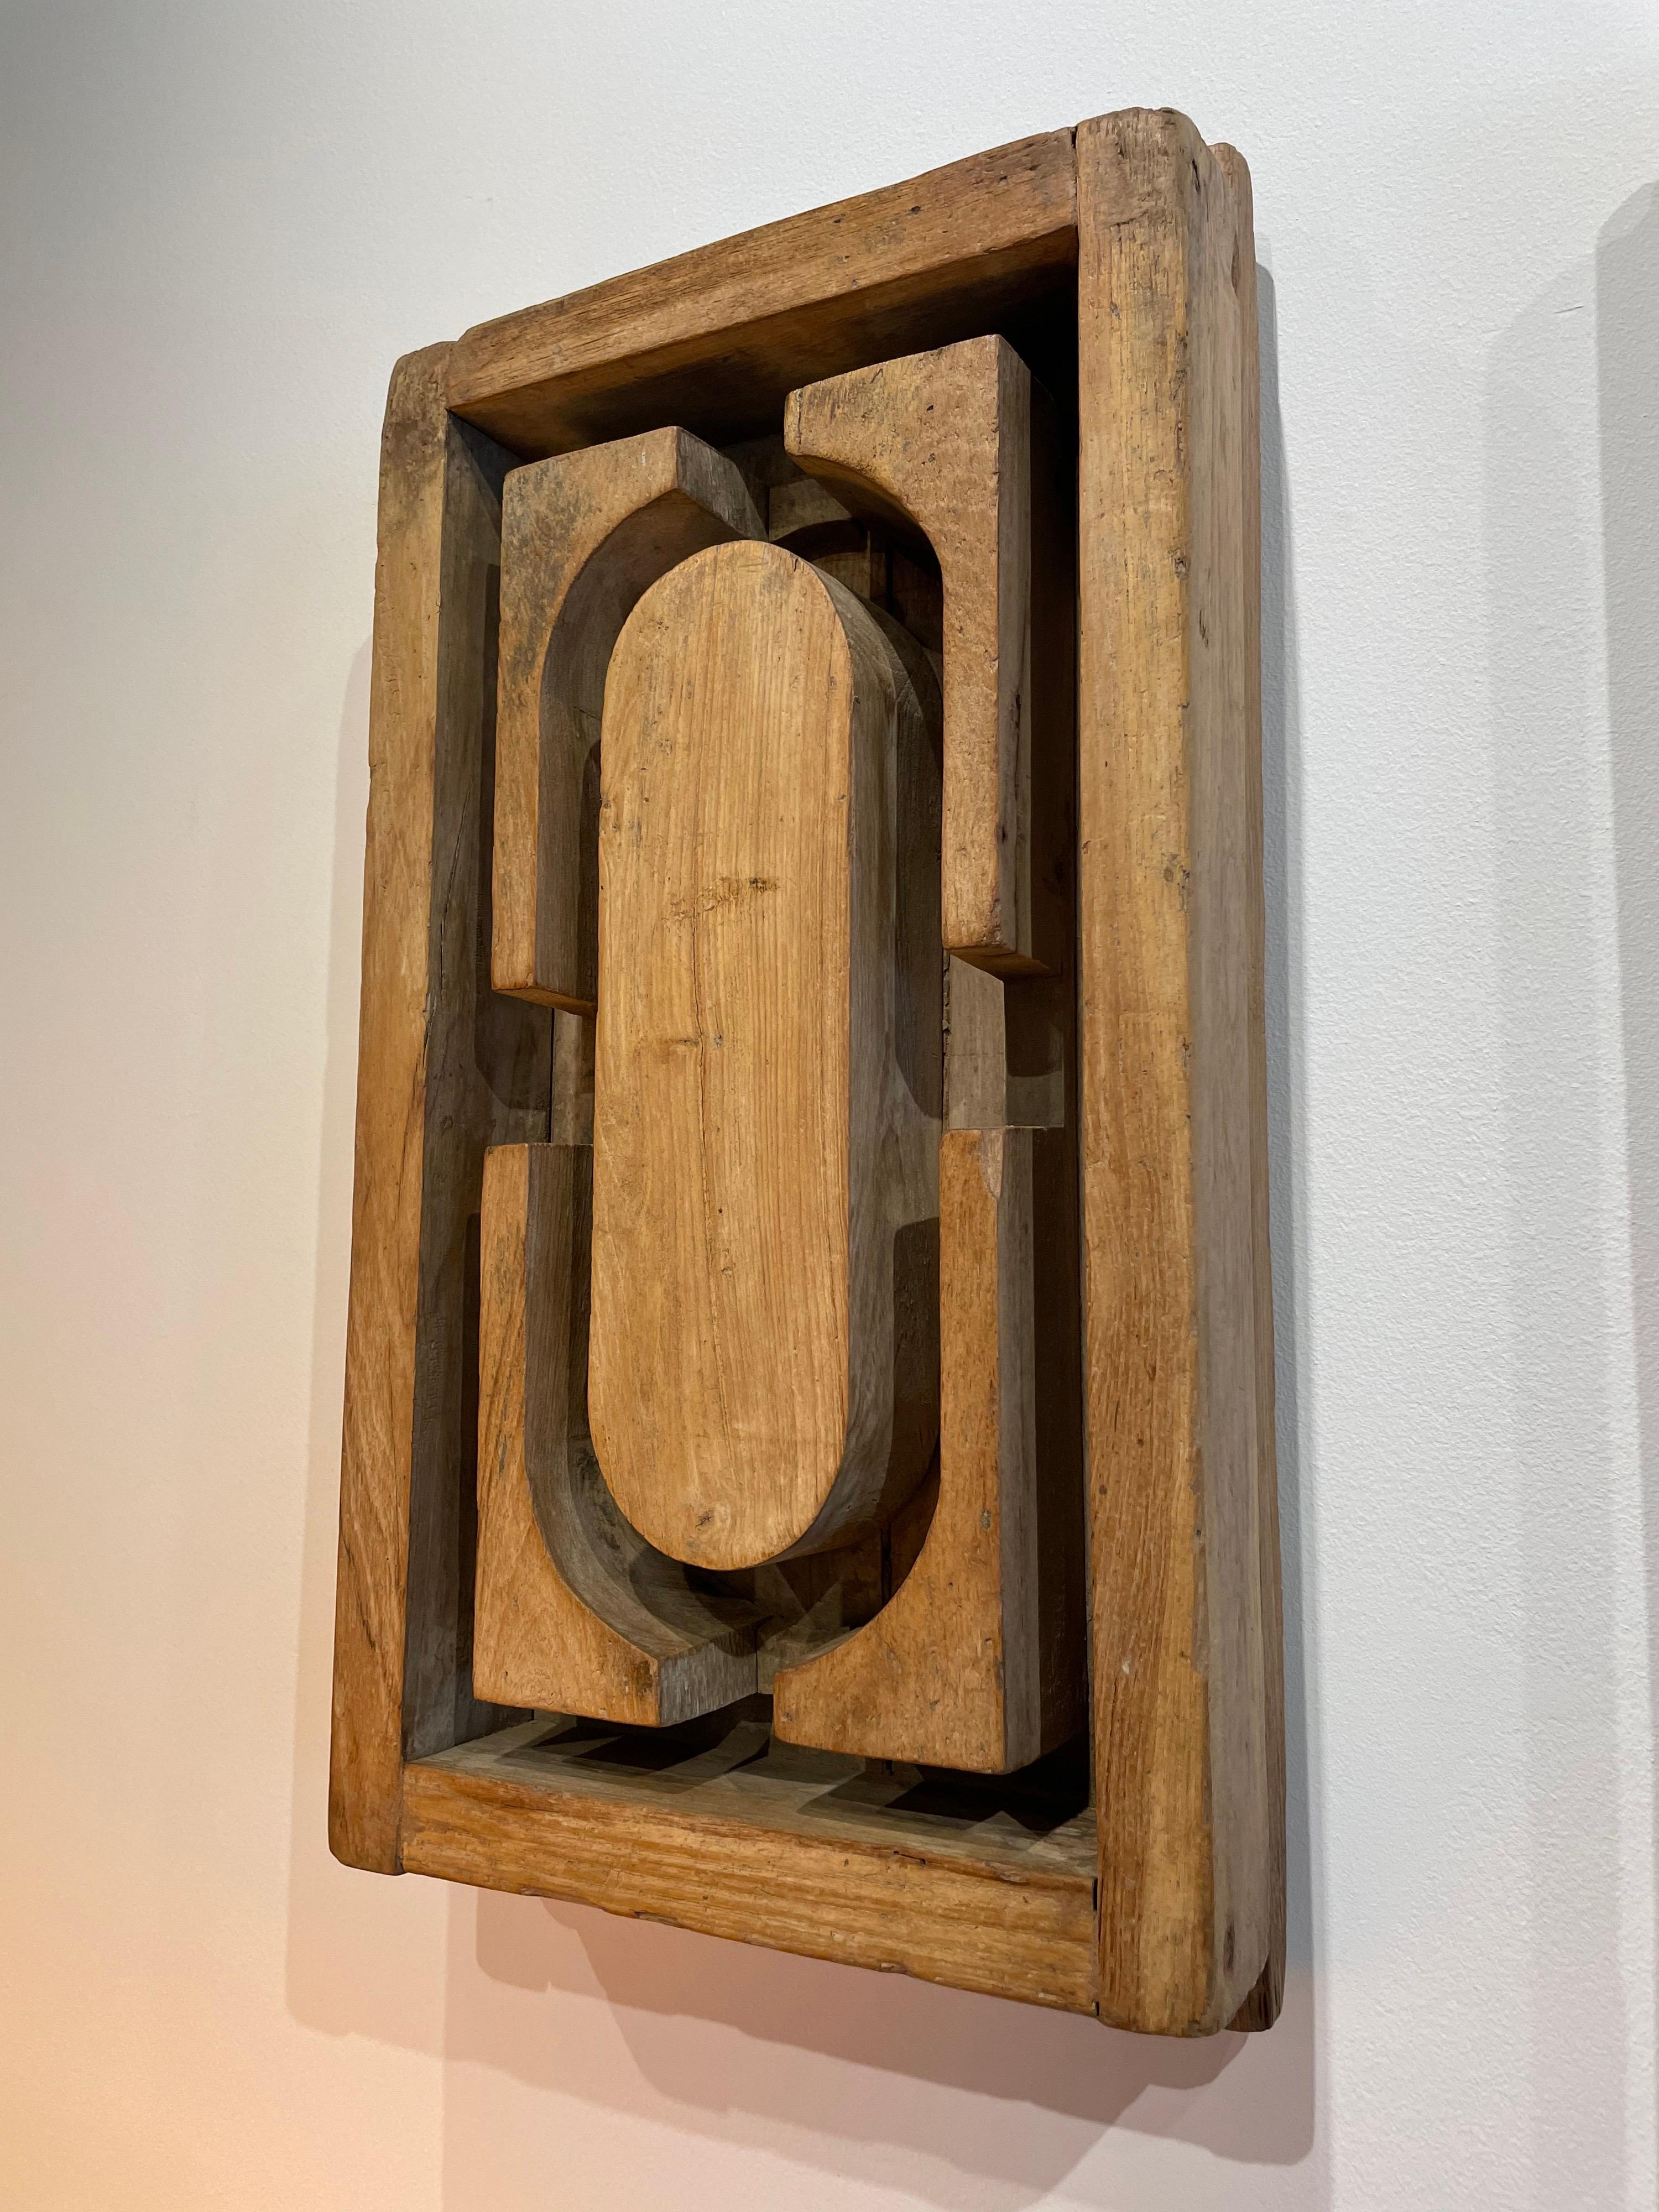 Beautiful and artistic industrial wood mold as wall art, small enough to place in any space while keeping a natural and stylish look in your design.